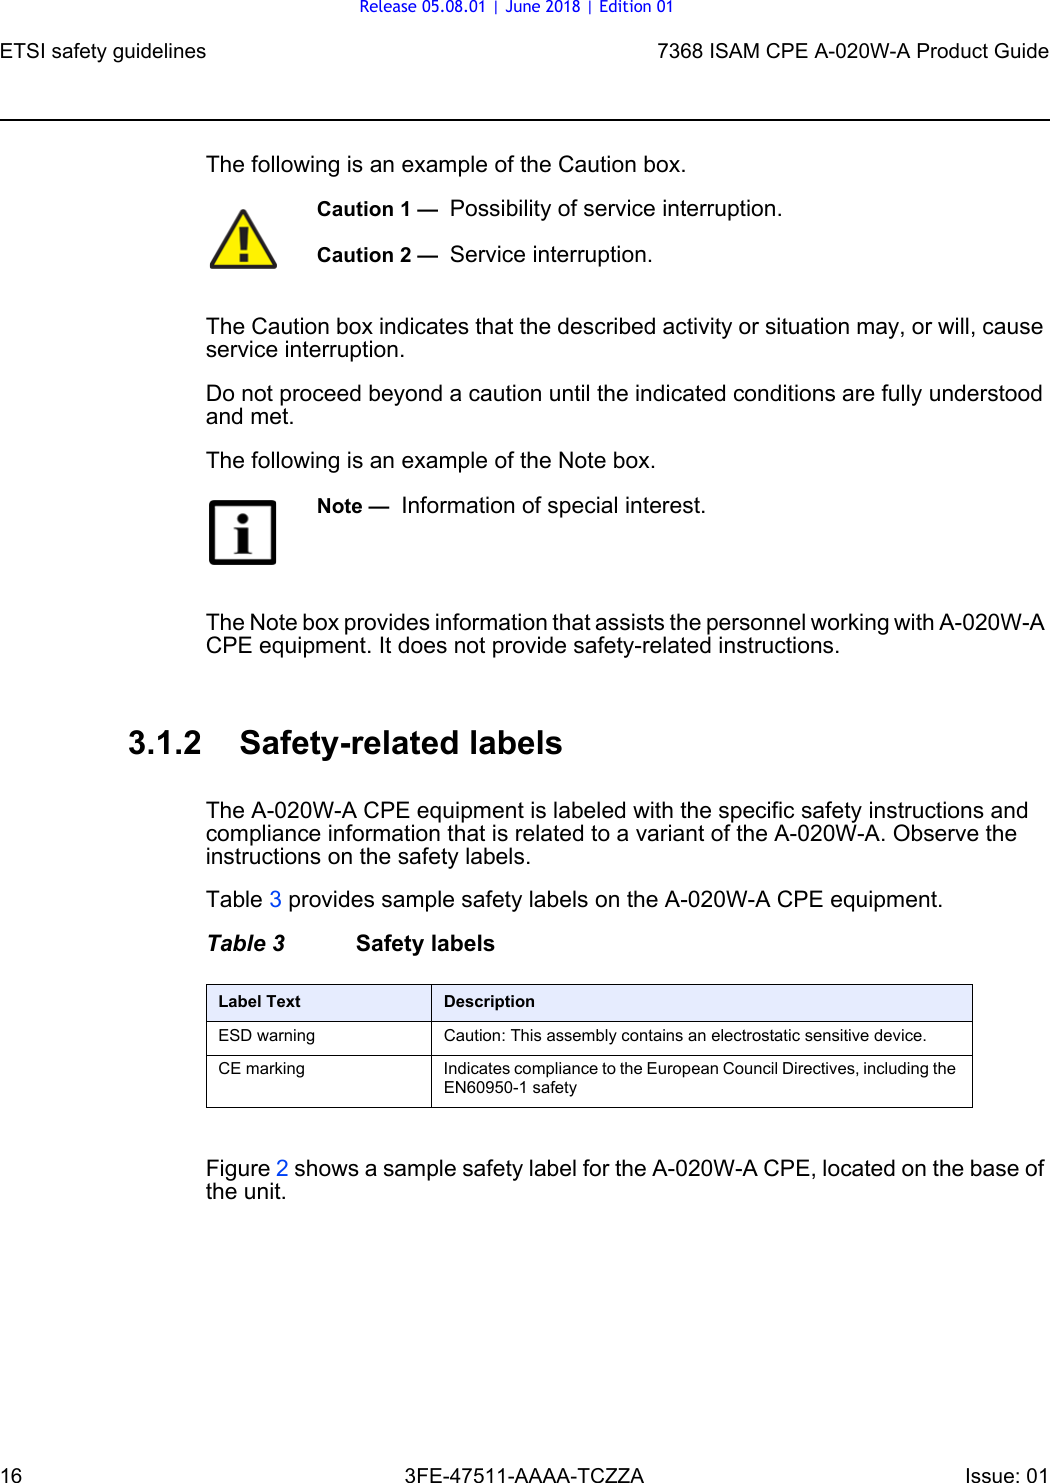 ETSI safety guidelines167368 ISAM CPE A-020W-A Product Guide3FE-47511-AAAA-TCZZA Issue: 01 The following is an example of the Caution box.The Caution box indicates that the described activity or situation may, or will, cause service interruption.Do not proceed beyond a caution until the indicated conditions are fully understood and met.The following is an example of the Note box.The Note box provides information that assists the personnel working with A-020W-A CPE equipment. It does not provide safety-related instructions.3.1.2 Safety-related labelsThe A-020W-A CPE equipment is labeled with the specific safety instructions and compliance information that is related to a variant of the A-020W-A. Observe the instructions on the safety labels.Table 3 provides sample safety labels on the A-020W-A CPE equipment.Table 3 Safety labelsFigure 2 shows a sample safety label for the A-020W-A CPE, located on the base of the unit.Caution 1 —  Possibility of service interruption.Caution 2 —  Service interruption.Note —  Information of special interest.Label Text DescriptionESD warning Caution: This assembly contains an electrostatic sensitive device.CE marking Indicates compliance to the European Council Directives, including the EN60950-1 safetyRelease 05.08.01 | June 2018 | Edition 01